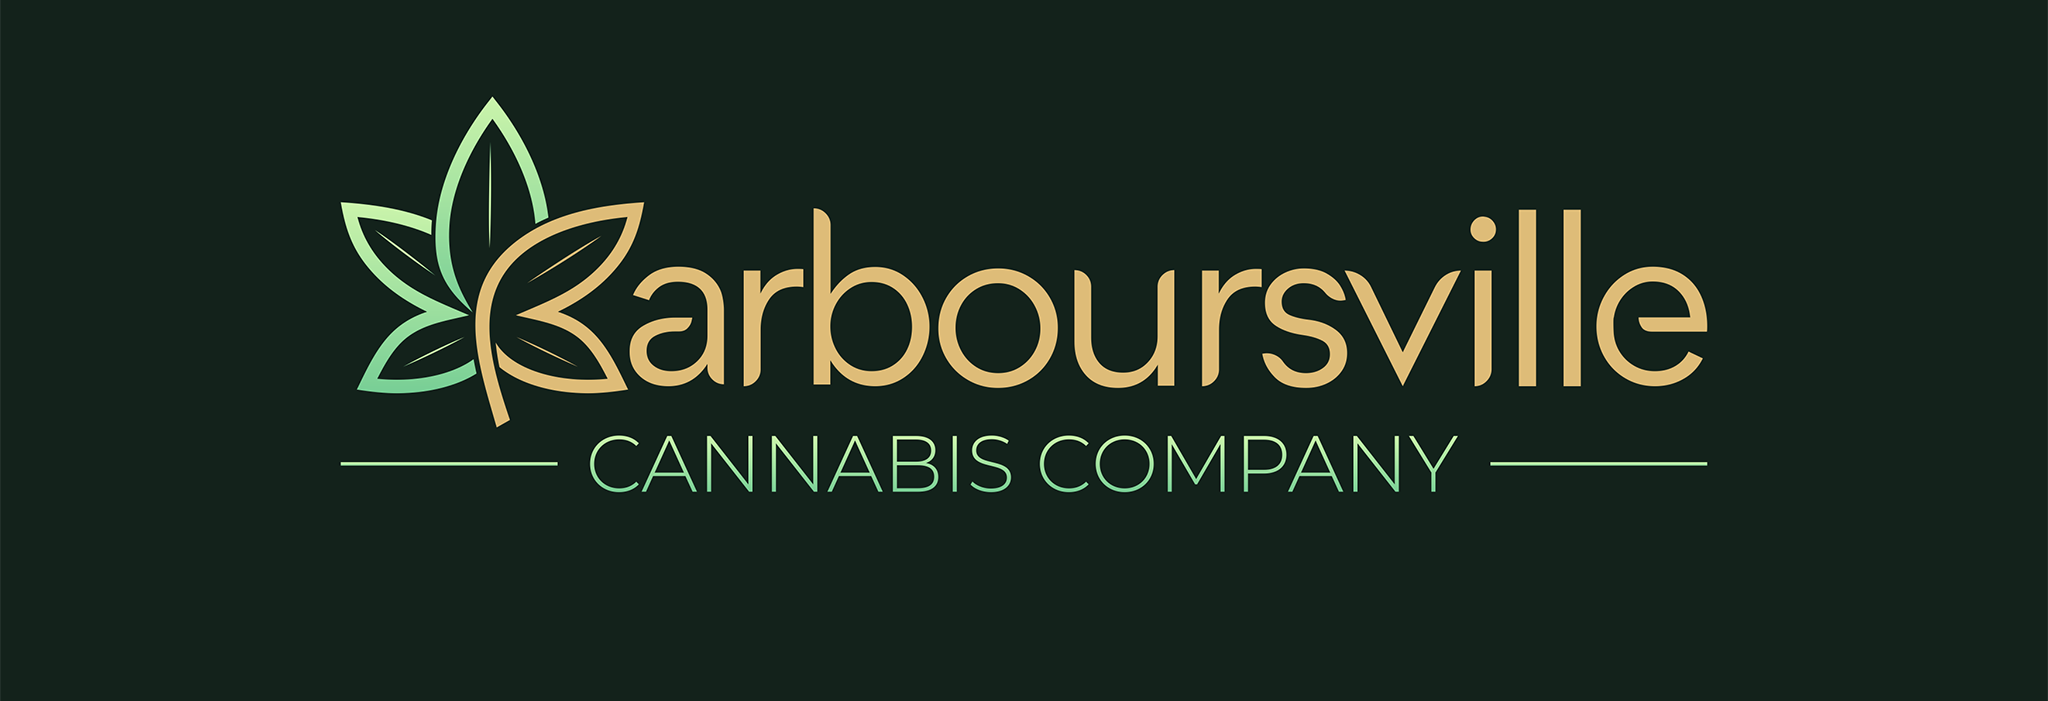 Welcome to Barboursville Cannabis Company